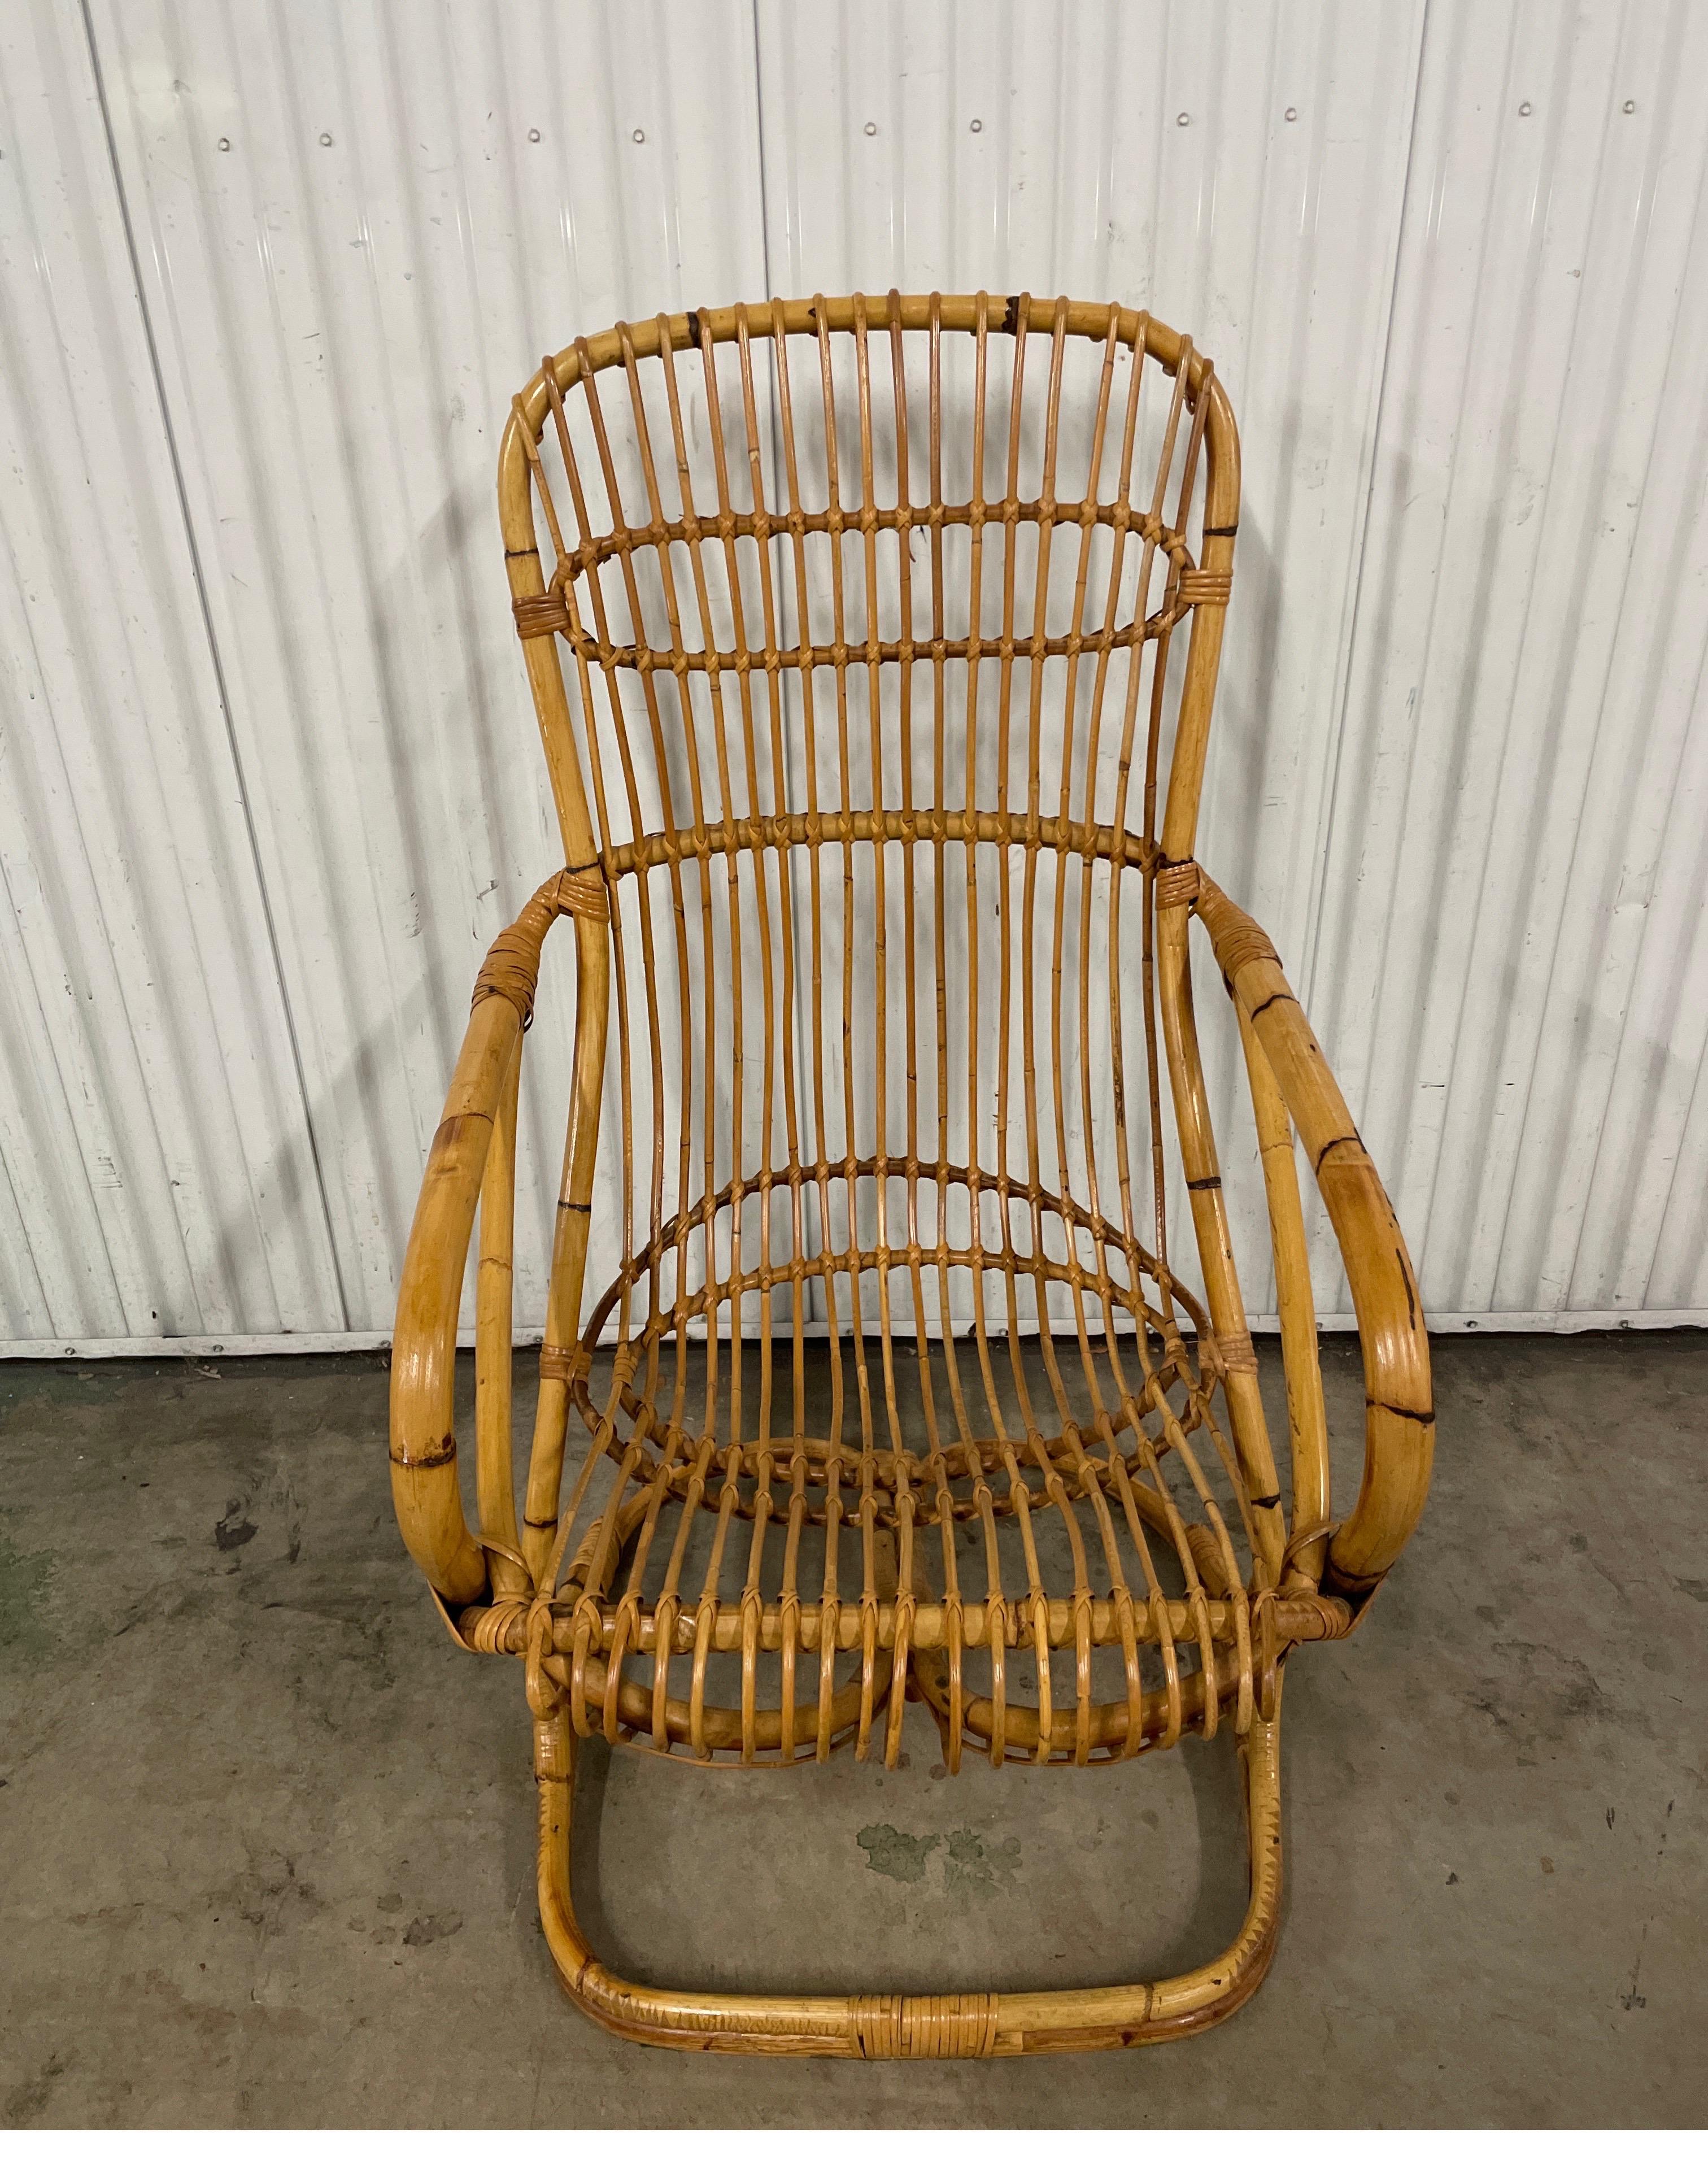 Vintage bent bamboo armchair by Tito Agnoli. A classic chair by this coveted Italian designer.